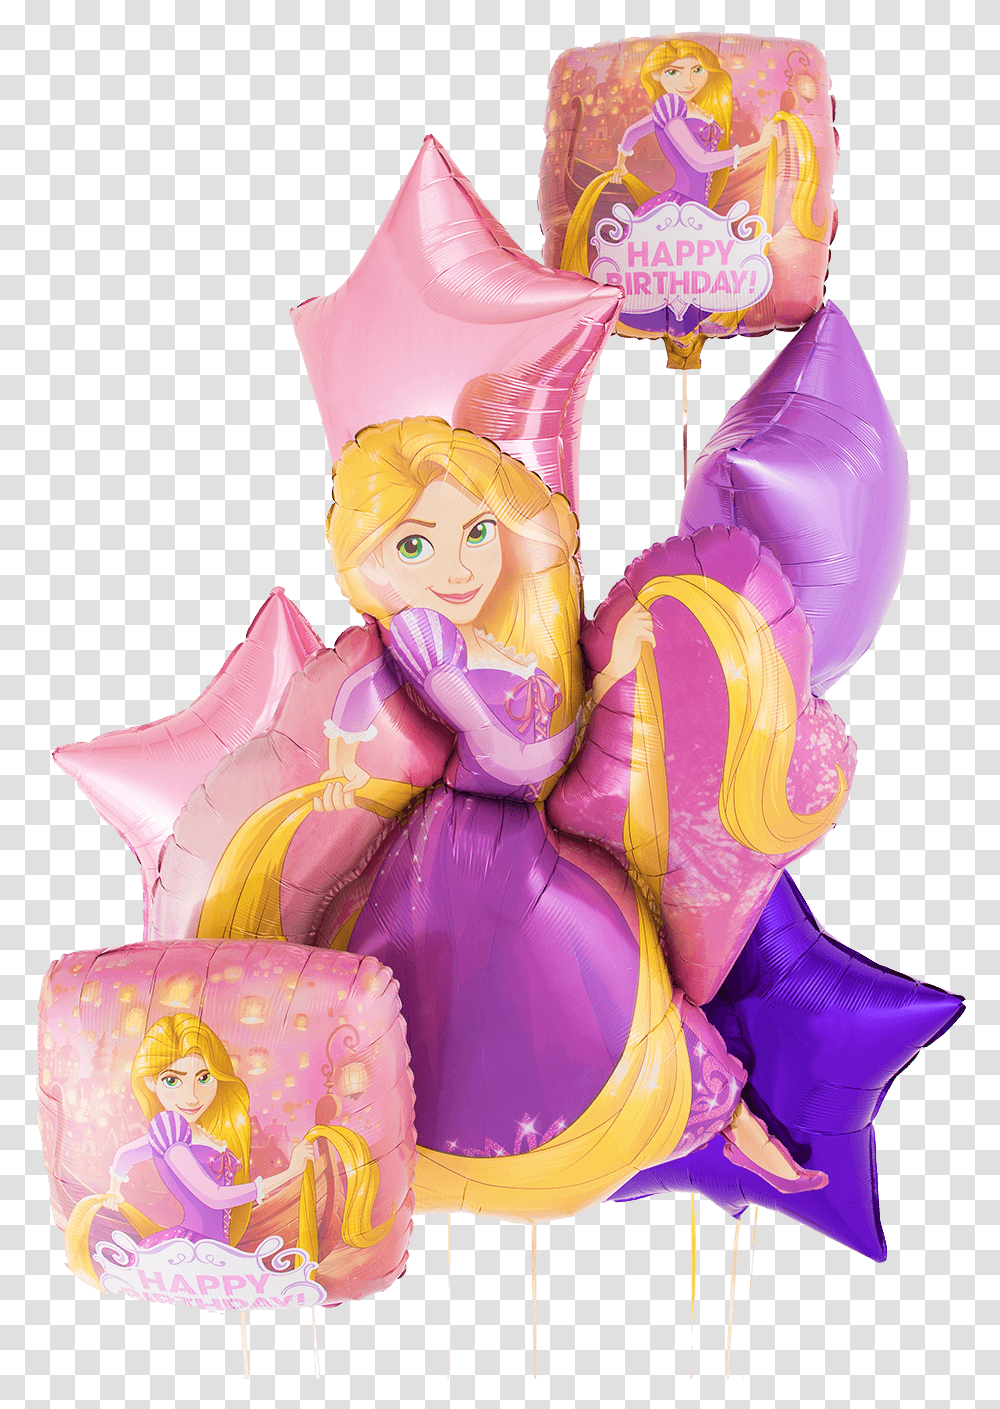 Rapunzel Tangled Rapunzel Happy Birthday Bunch Fictional Character, Figurine, Doll, Toy, Barbie Transparent Png